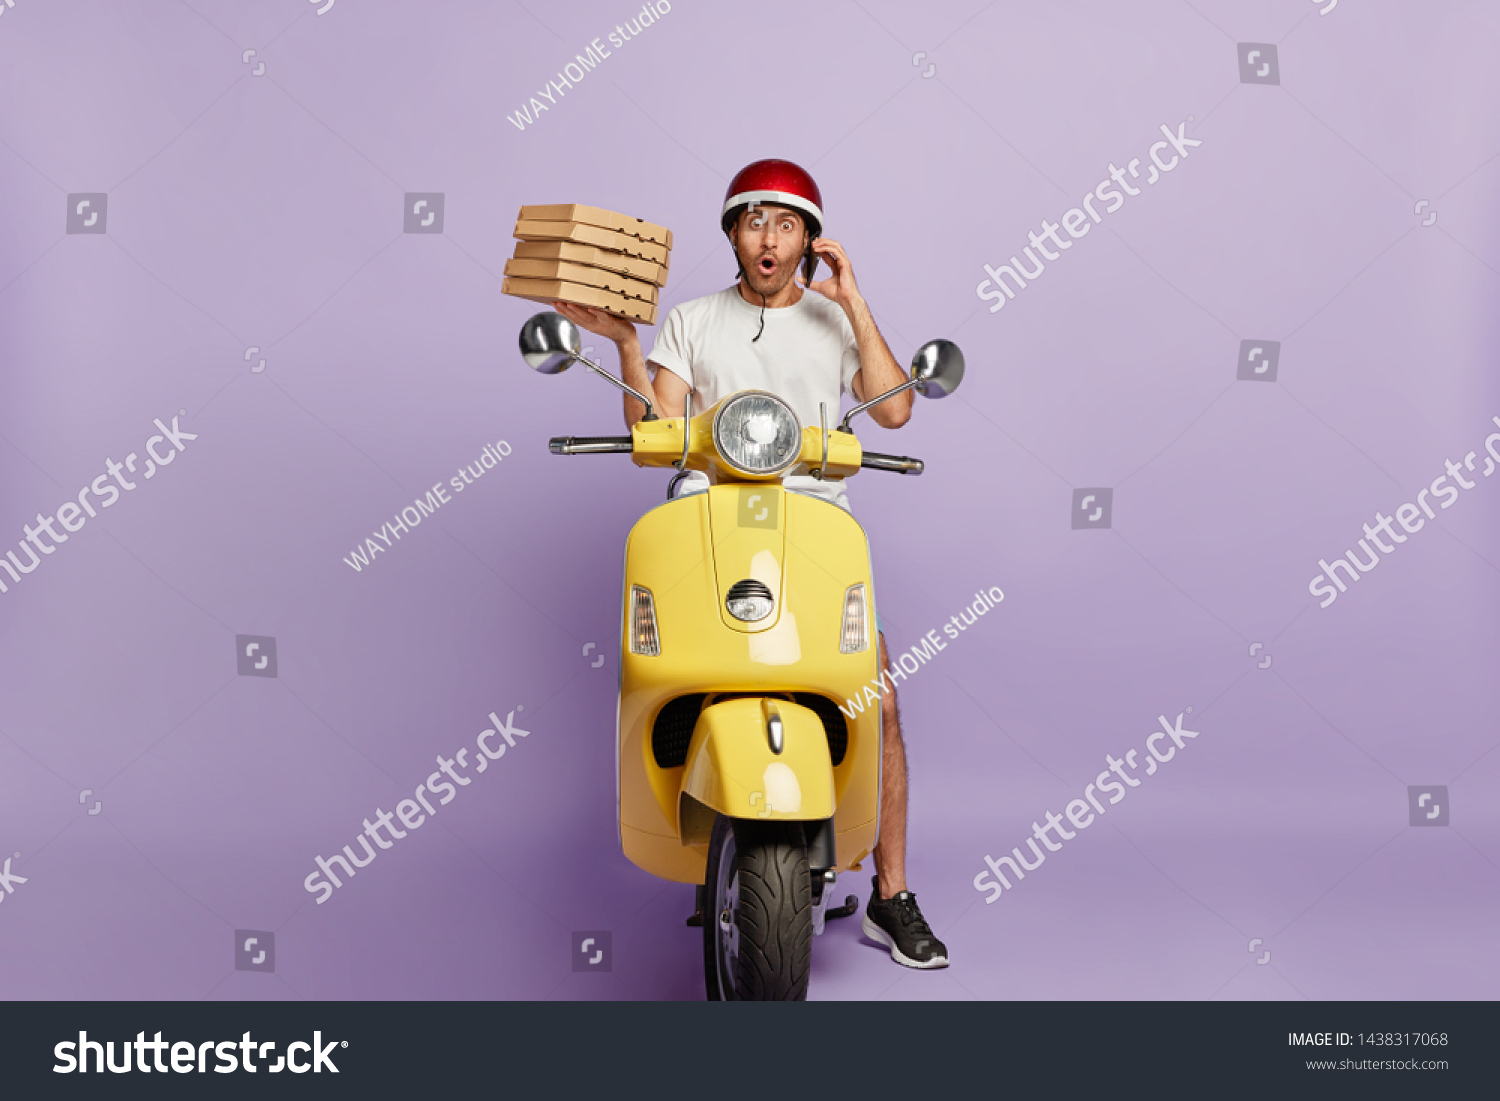 Food delivery concept. Shocked courier takes order over phone from customer, holds stack of cardboad pizza boxes, stops to have break drives fast motorbike, astonished to loose way, doesnt know route #1438317068